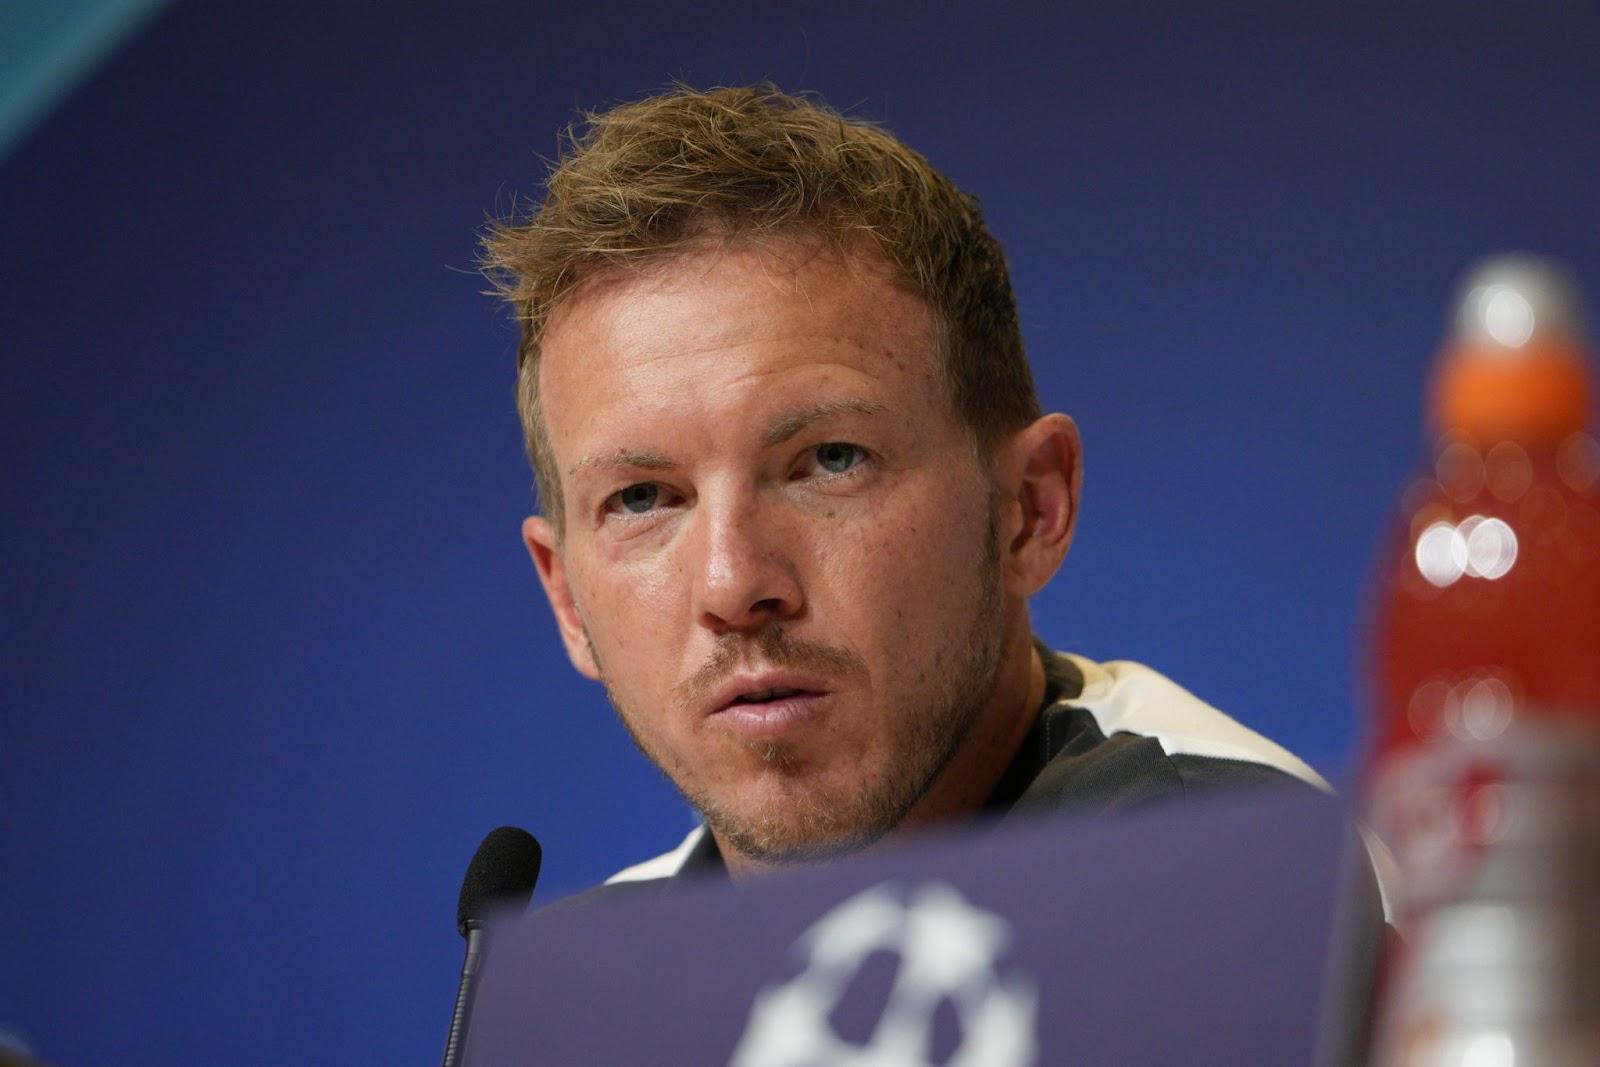 Julian Nagelsmann is considered one of the best young coaches in the world